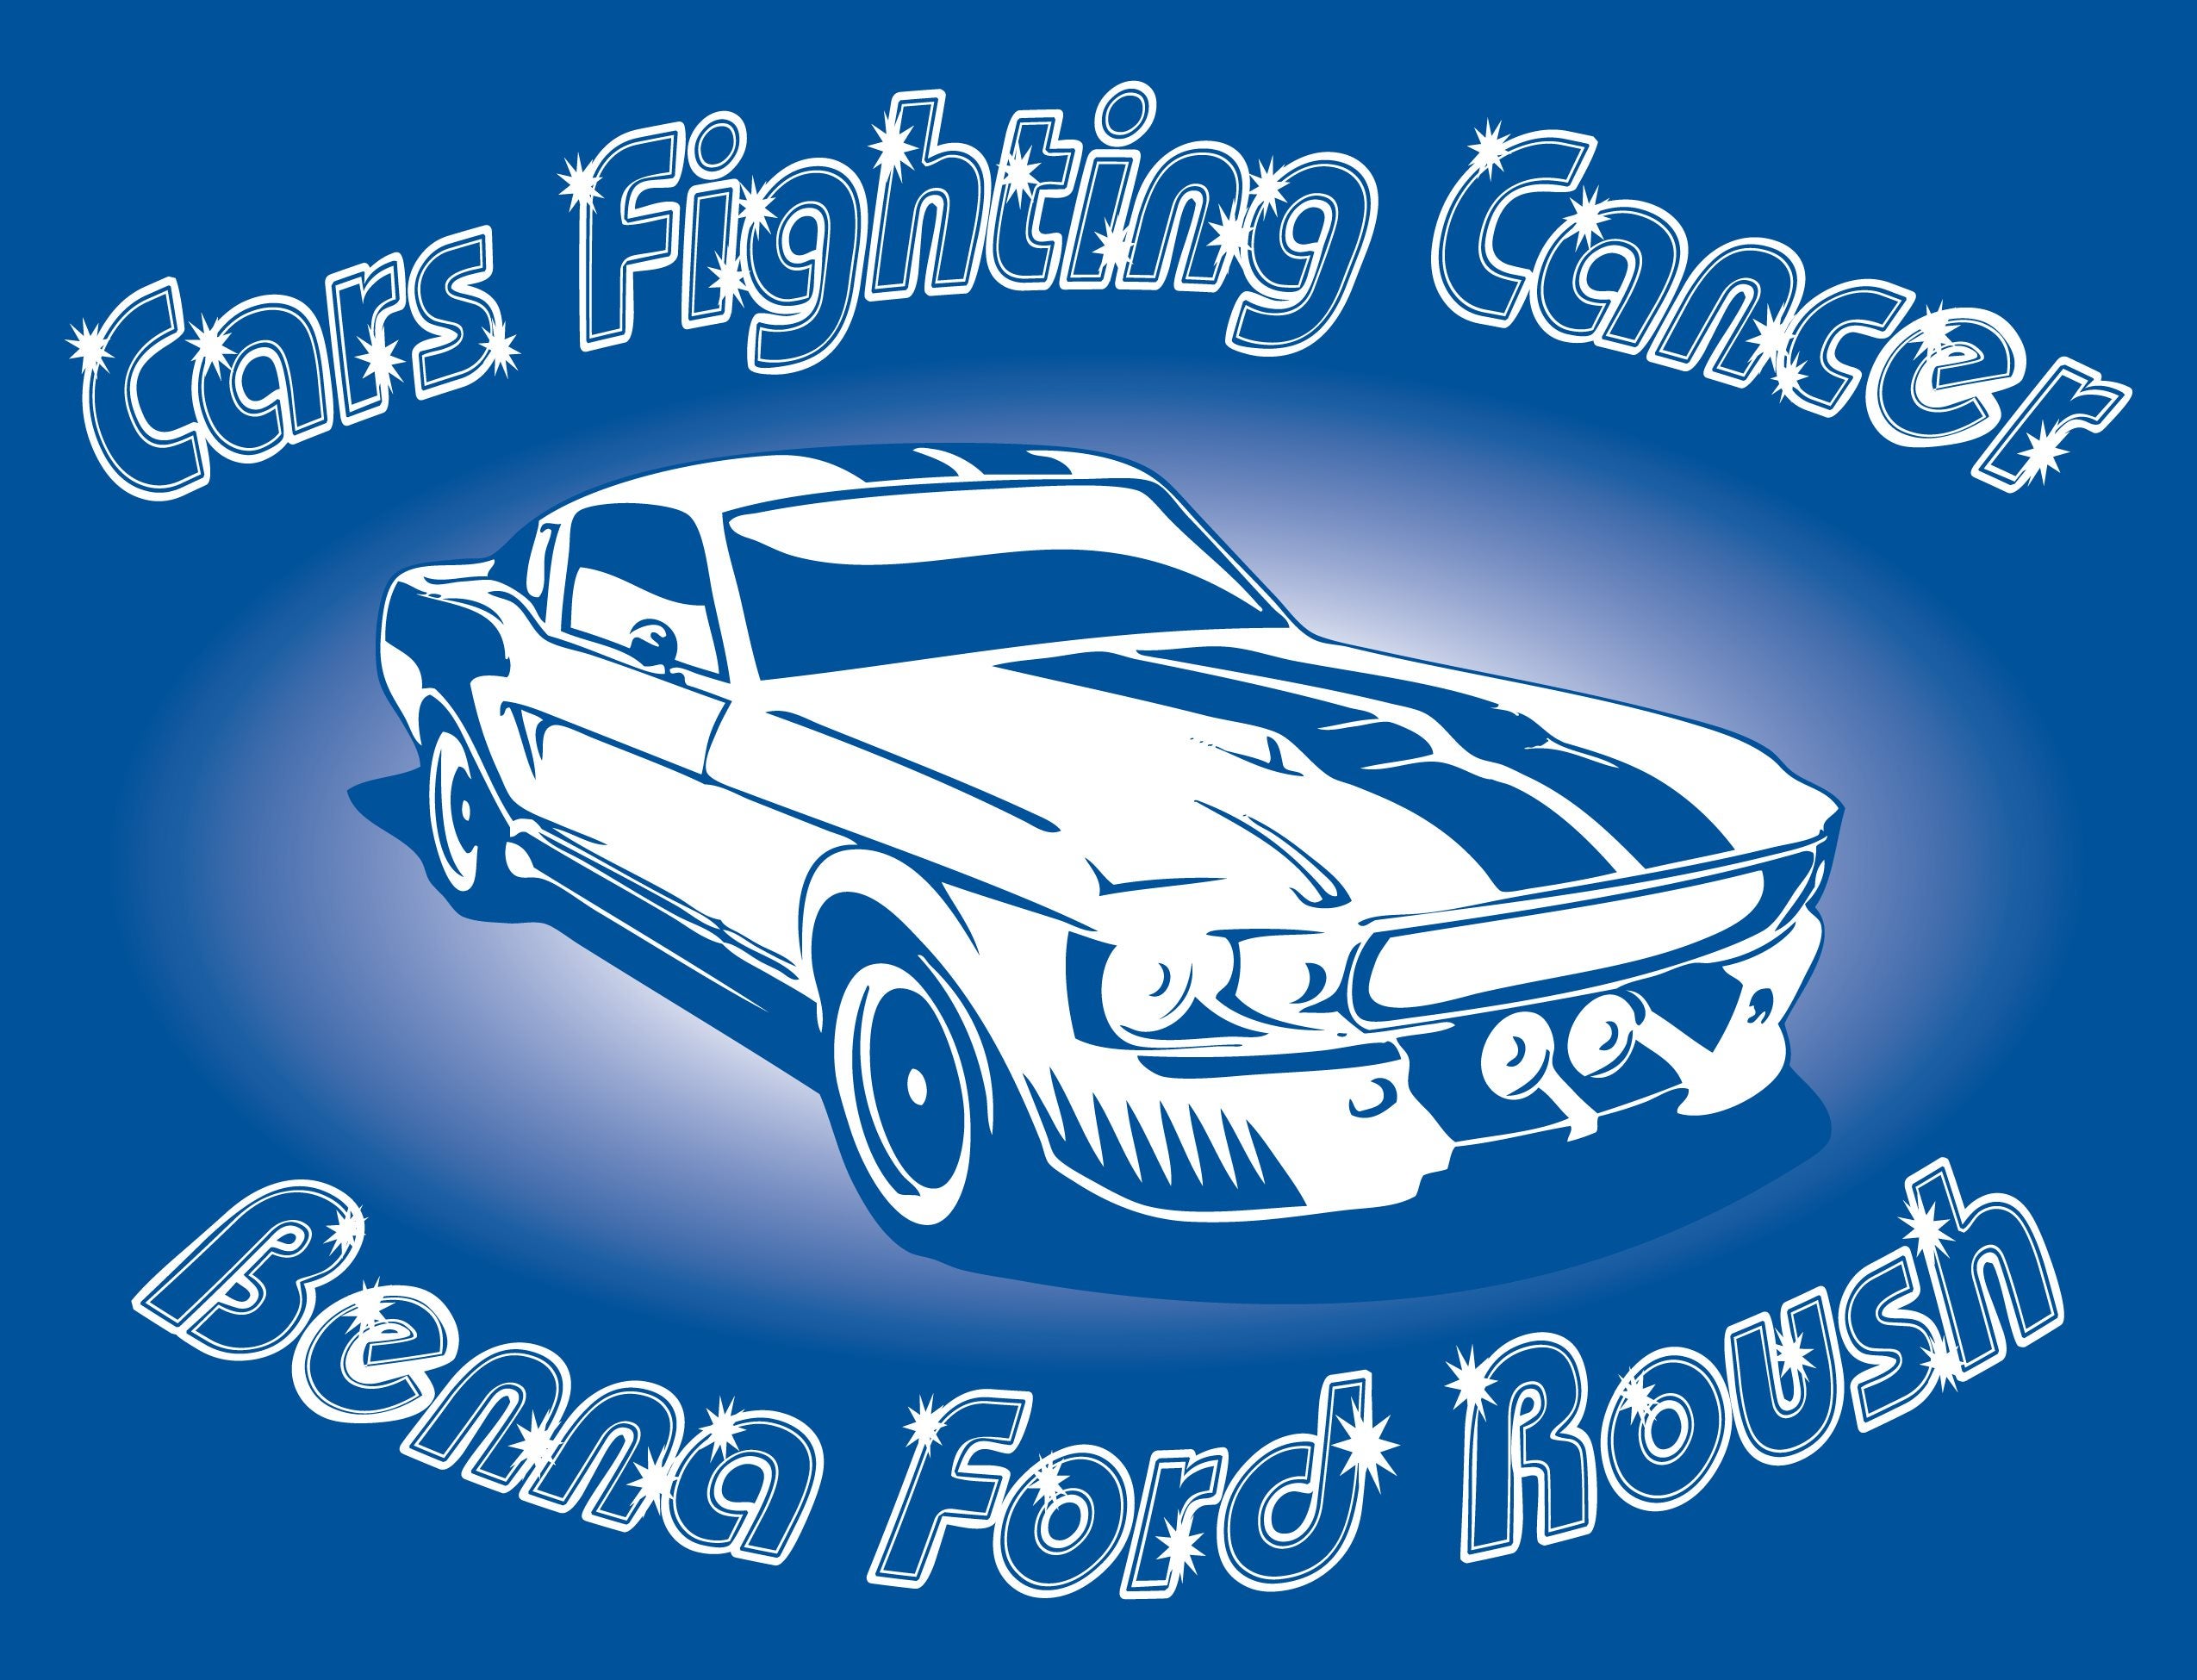 Cars Fighting Cancer St. Jude's Hospital Project Benna Ford